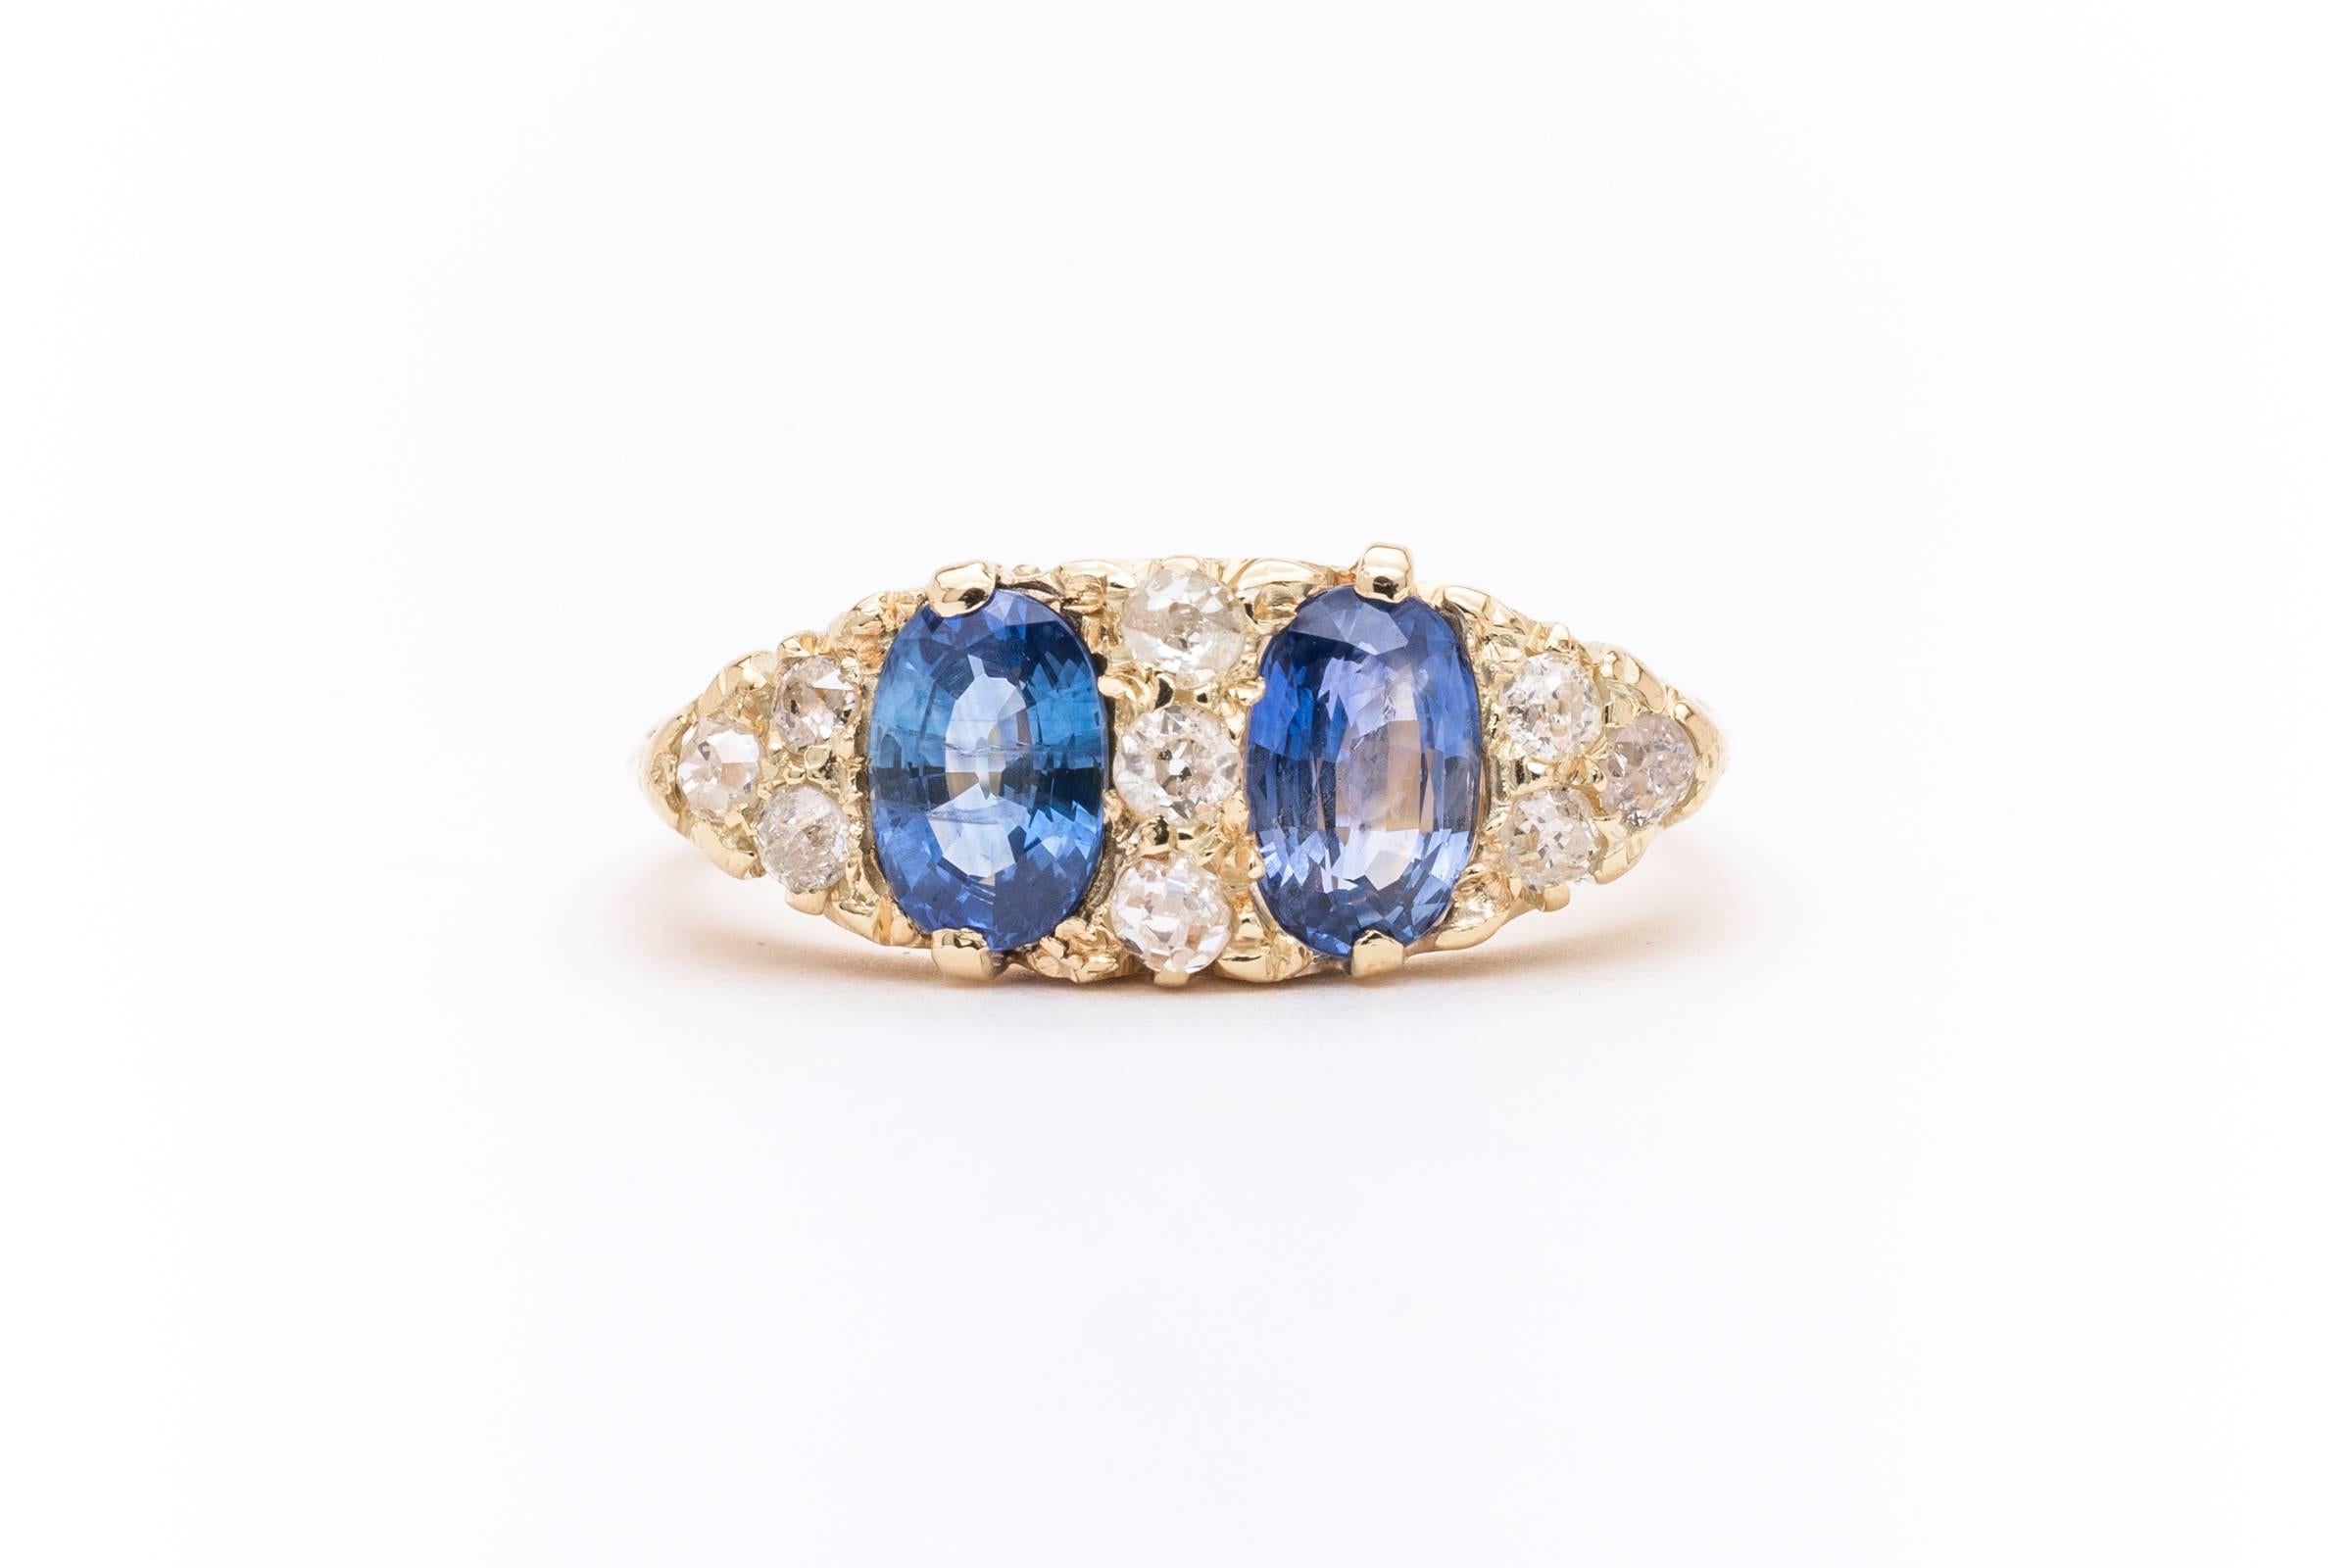 Beacon Hill Jewelers Presents:

A beautiful English victorian period sapphire and diamond ring in luxurious 18 karat yellow gold. Centered by a pair of beautiful elongated shaped cornflower blue Ceylon sapphires, this ring features beautiful